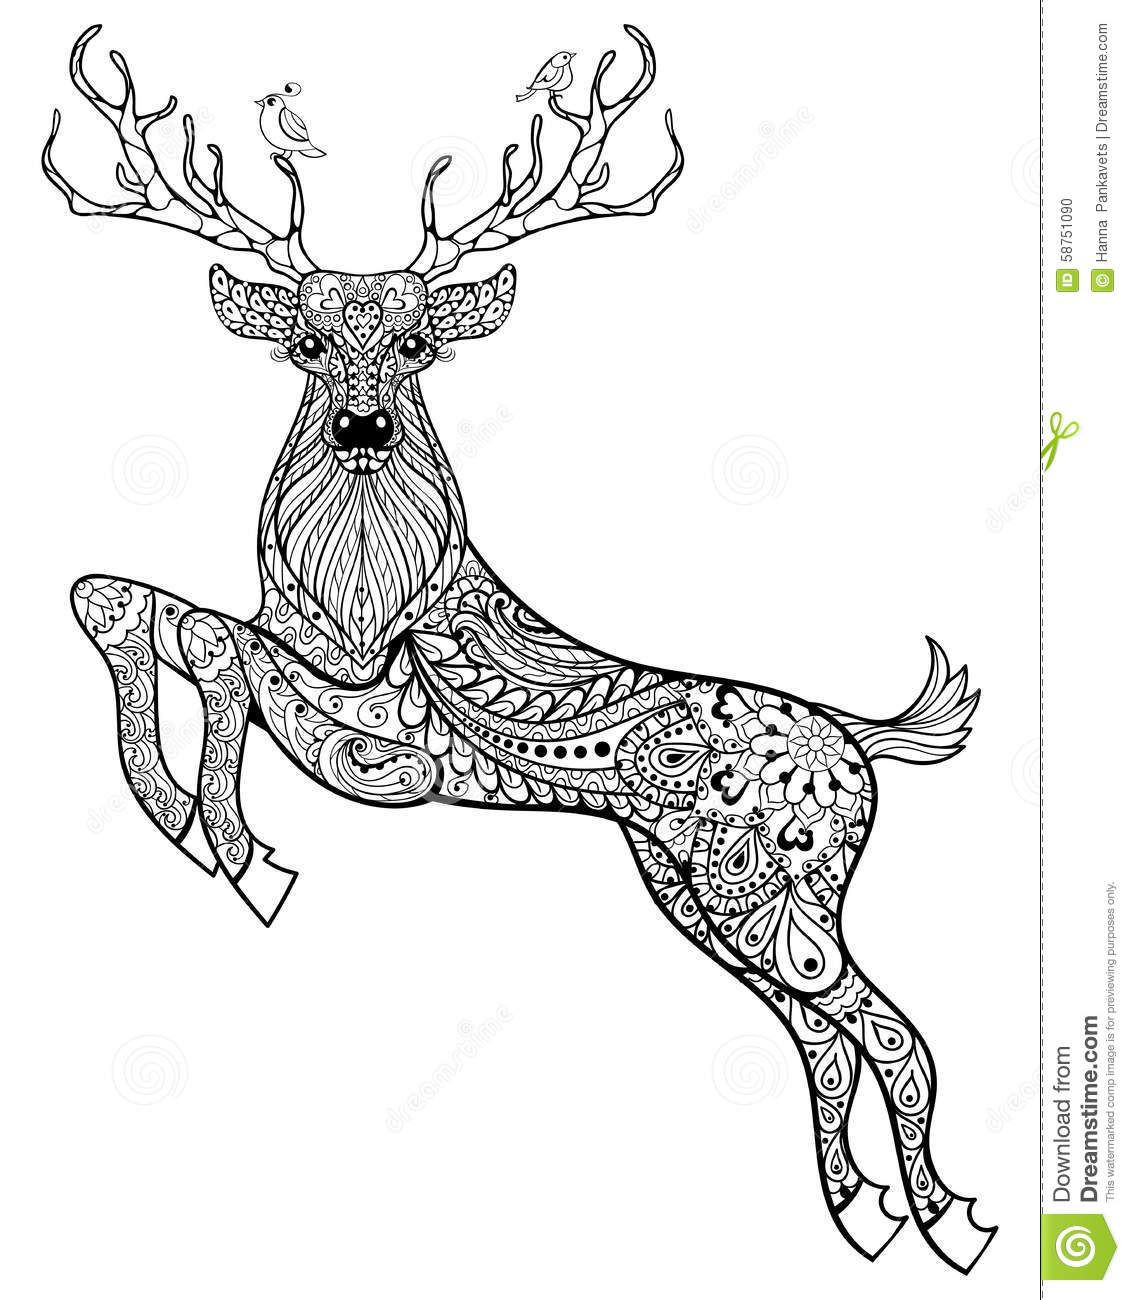 Best ideas about Deer Coloring Pages For Adults
. Save or Pin Hand Drawn Magic Horned Deer With Birds For Adult Anti Now.